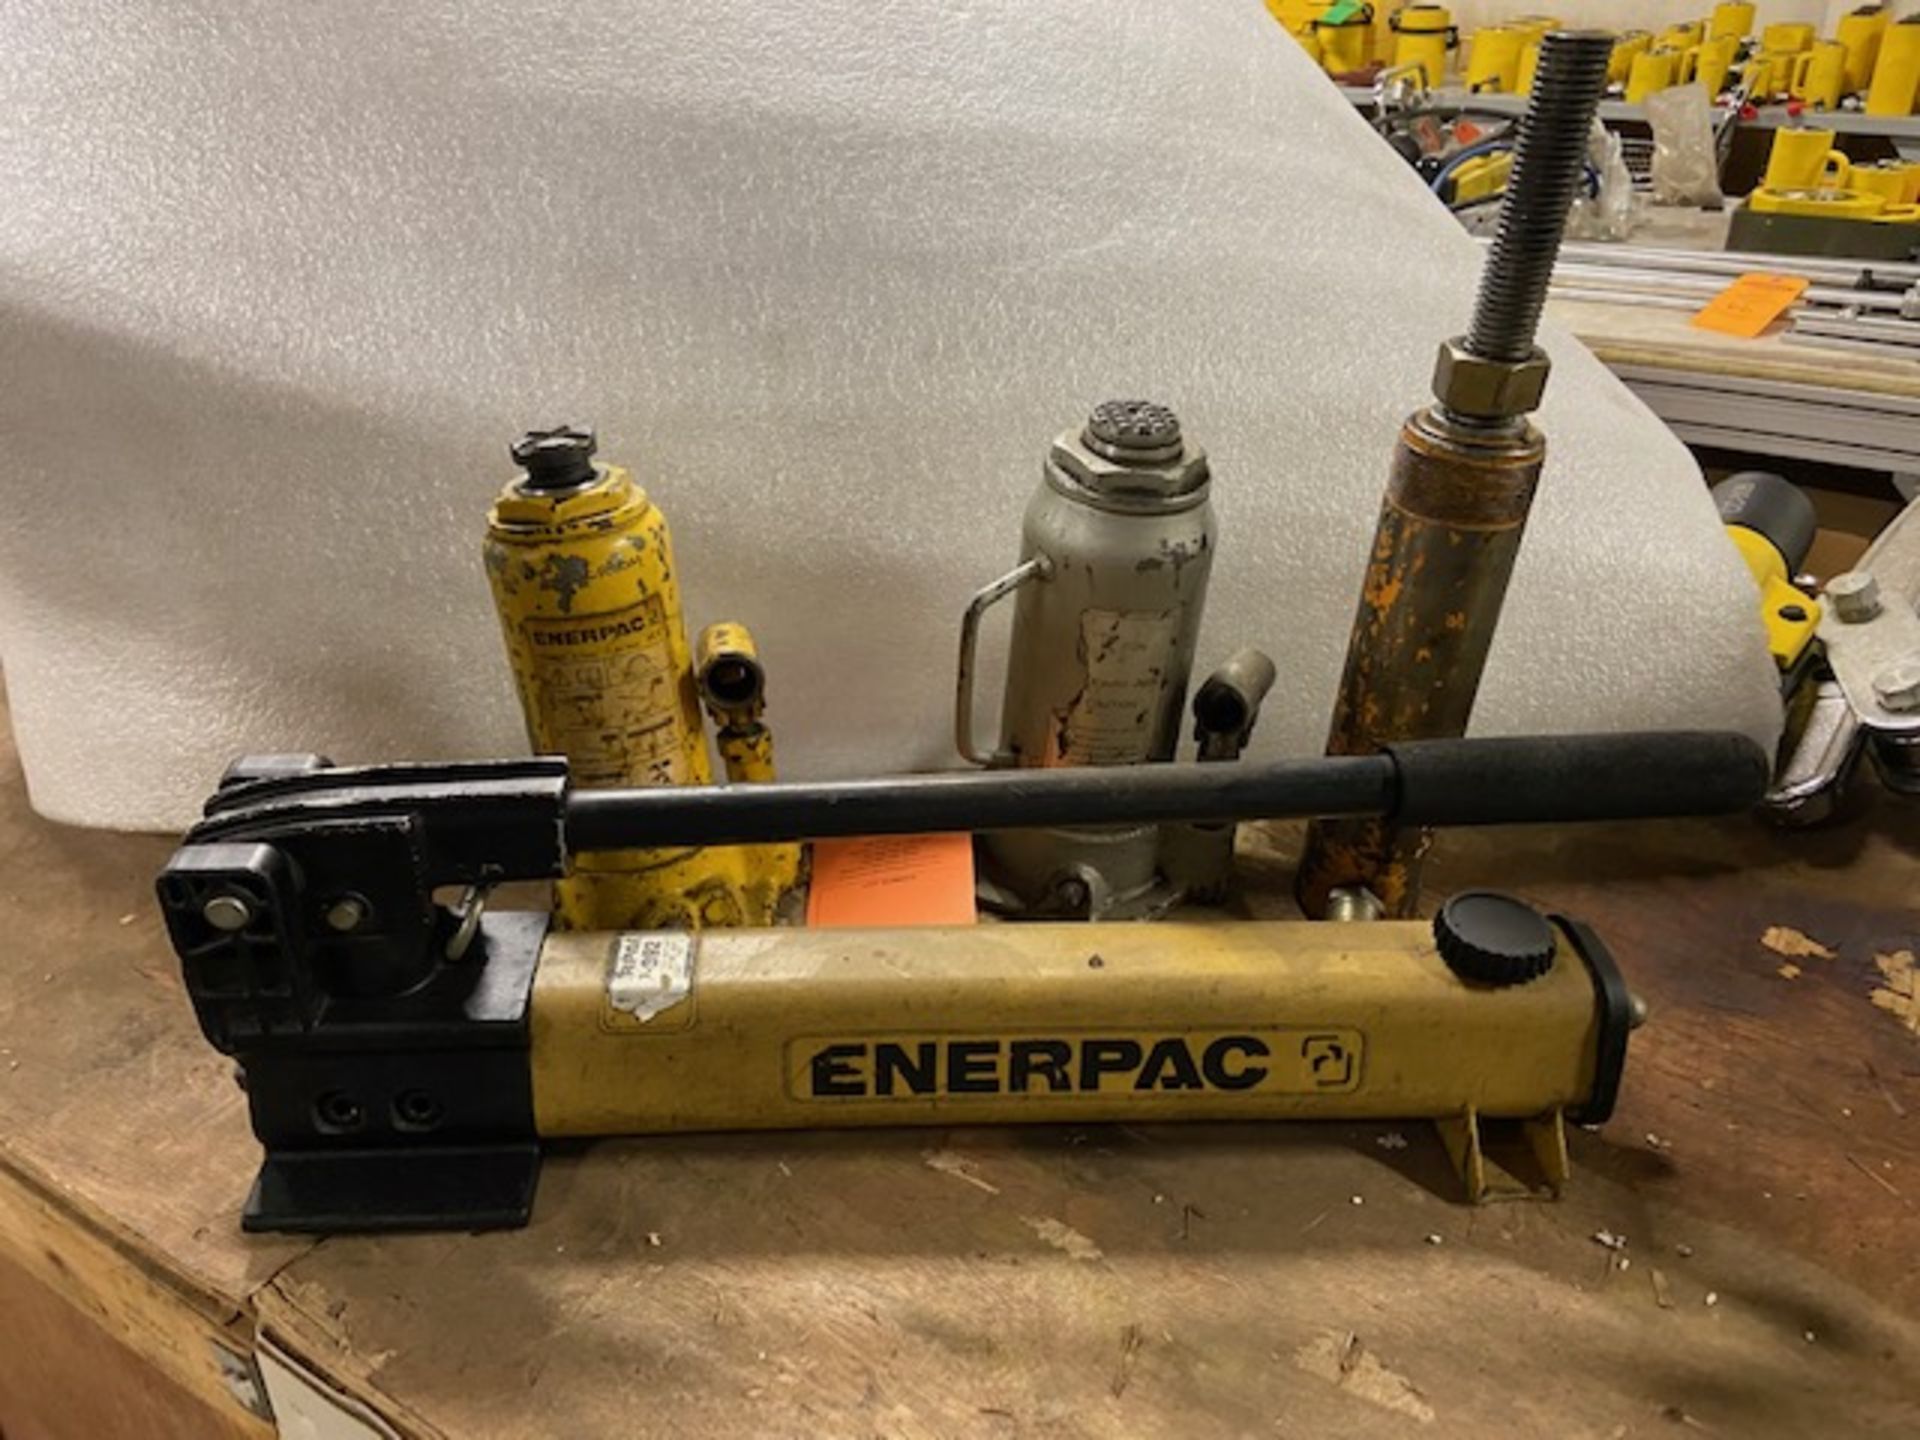 4 Piece Set with Enerpac Jacks and Hand Pump